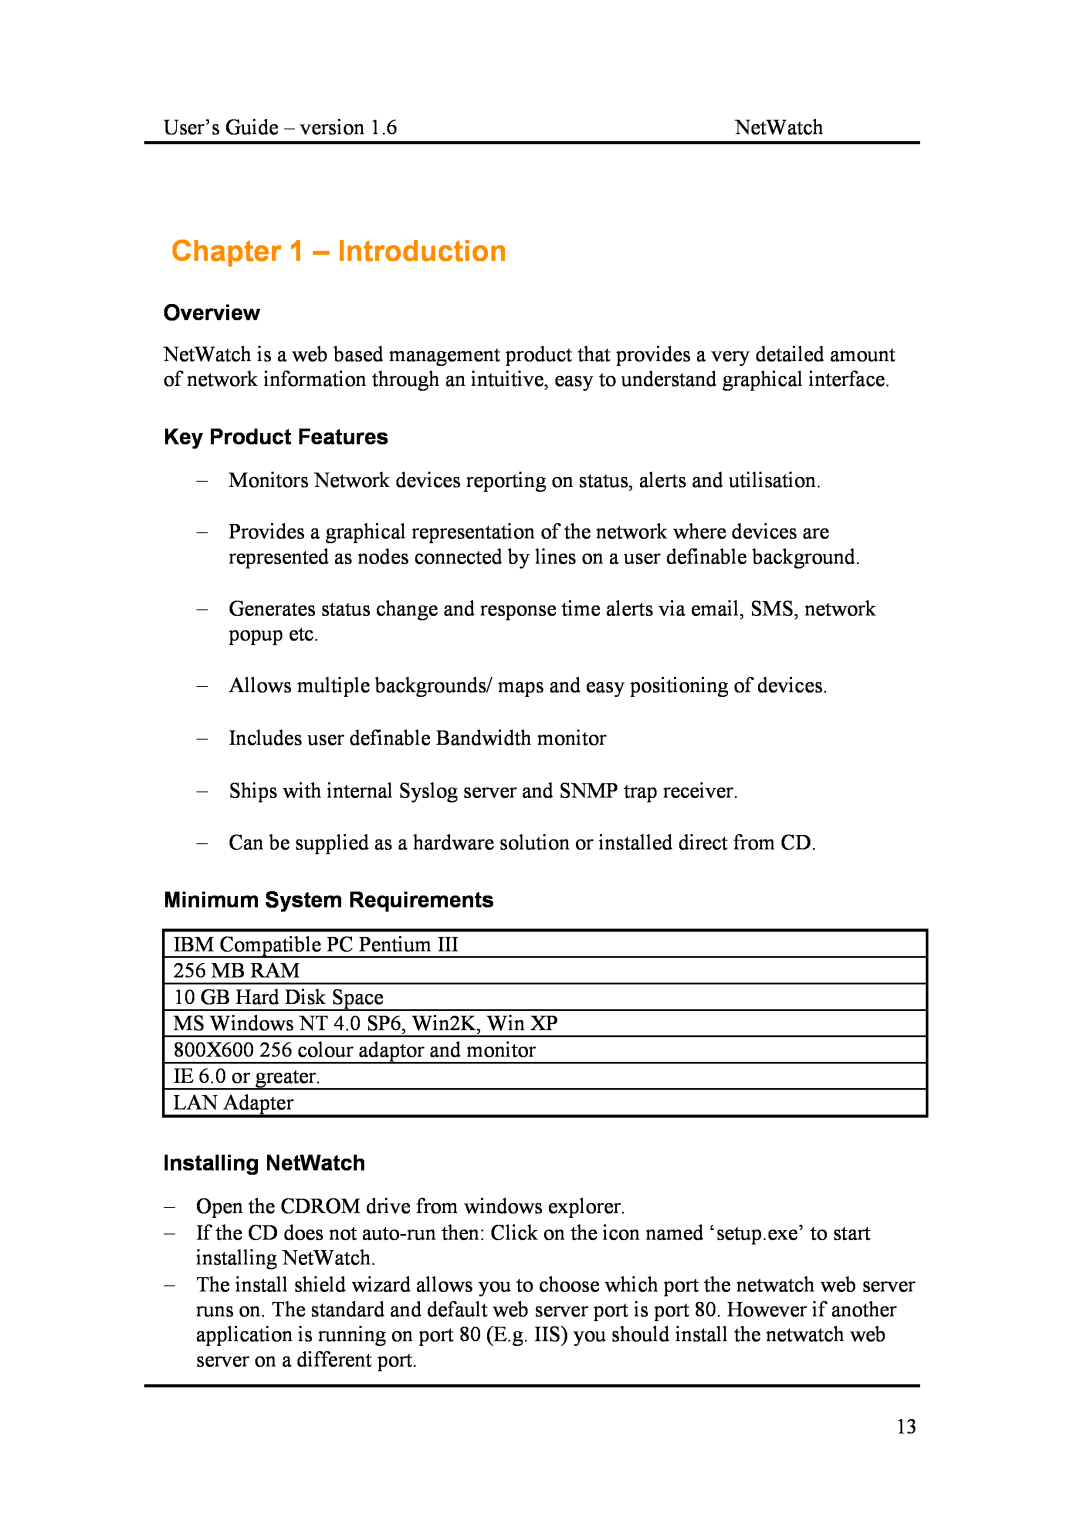 Fluke Network Router manual Introduction, Overview, Key Product Features, Minimum System Requirements, Installing NetWatch 